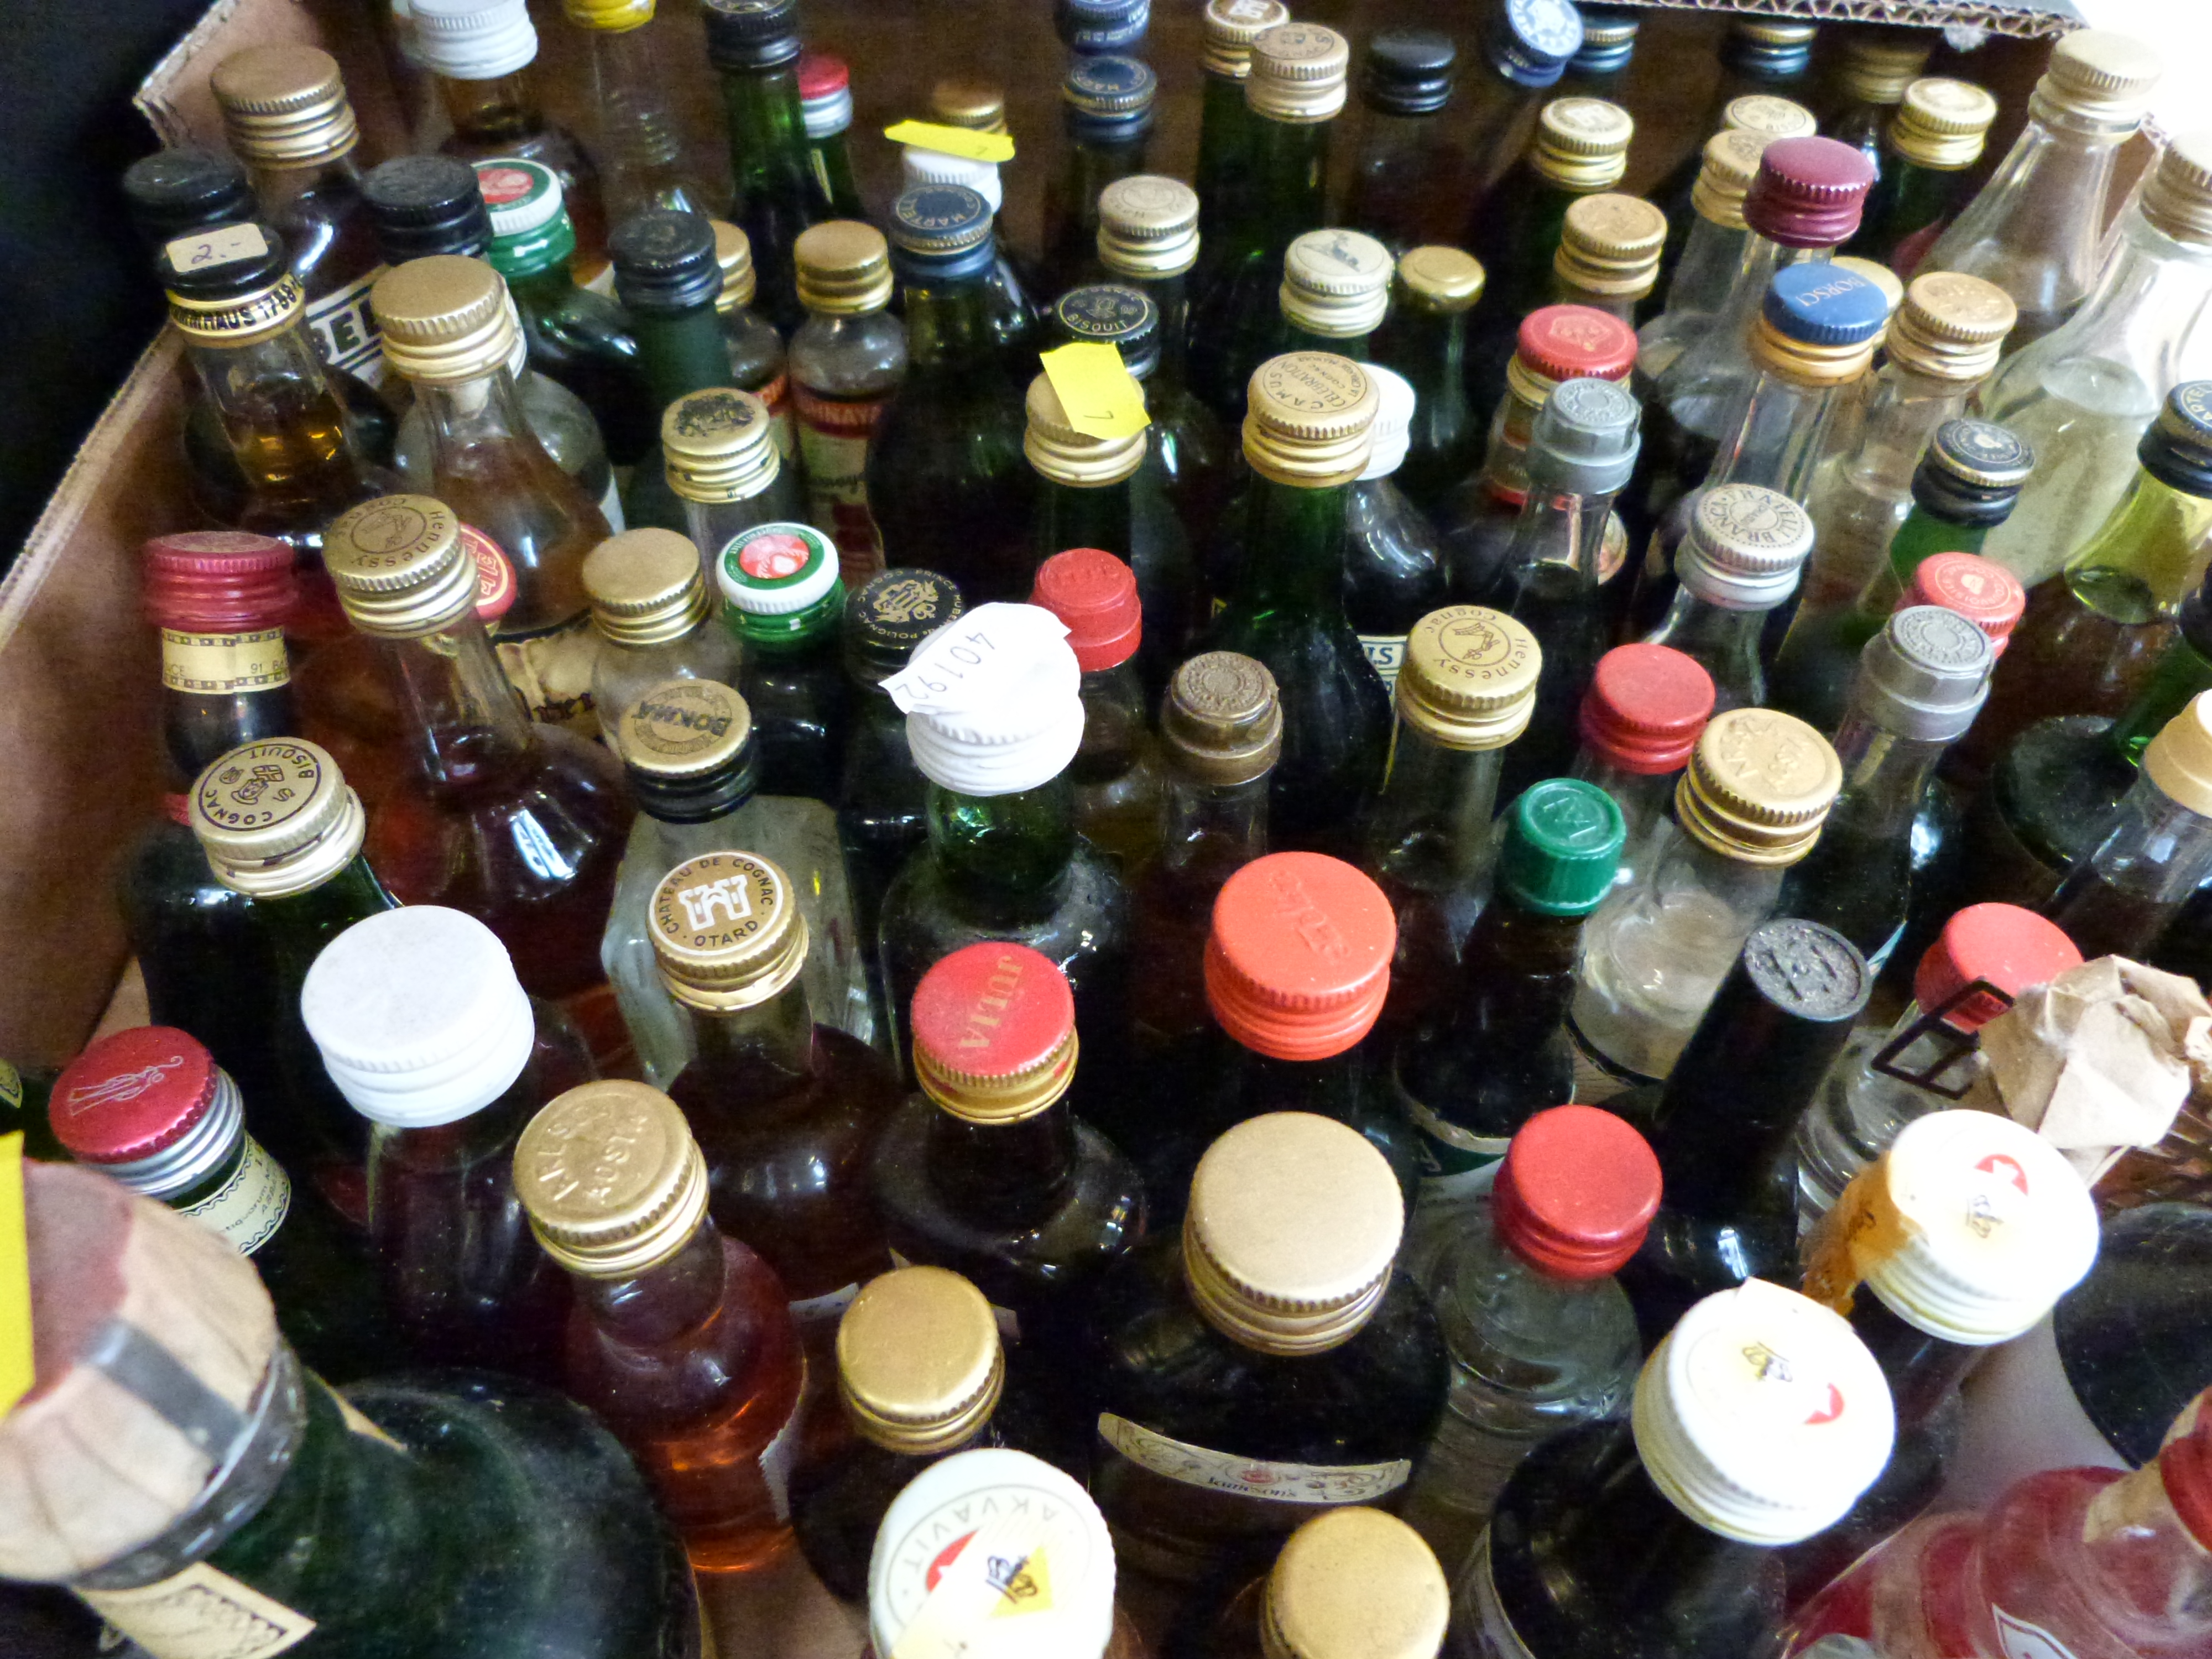 Approximately 140 alcohol miniatures to include Beehive, Jagermeister, Licorasin, Suze, Martini, - Image 3 of 3